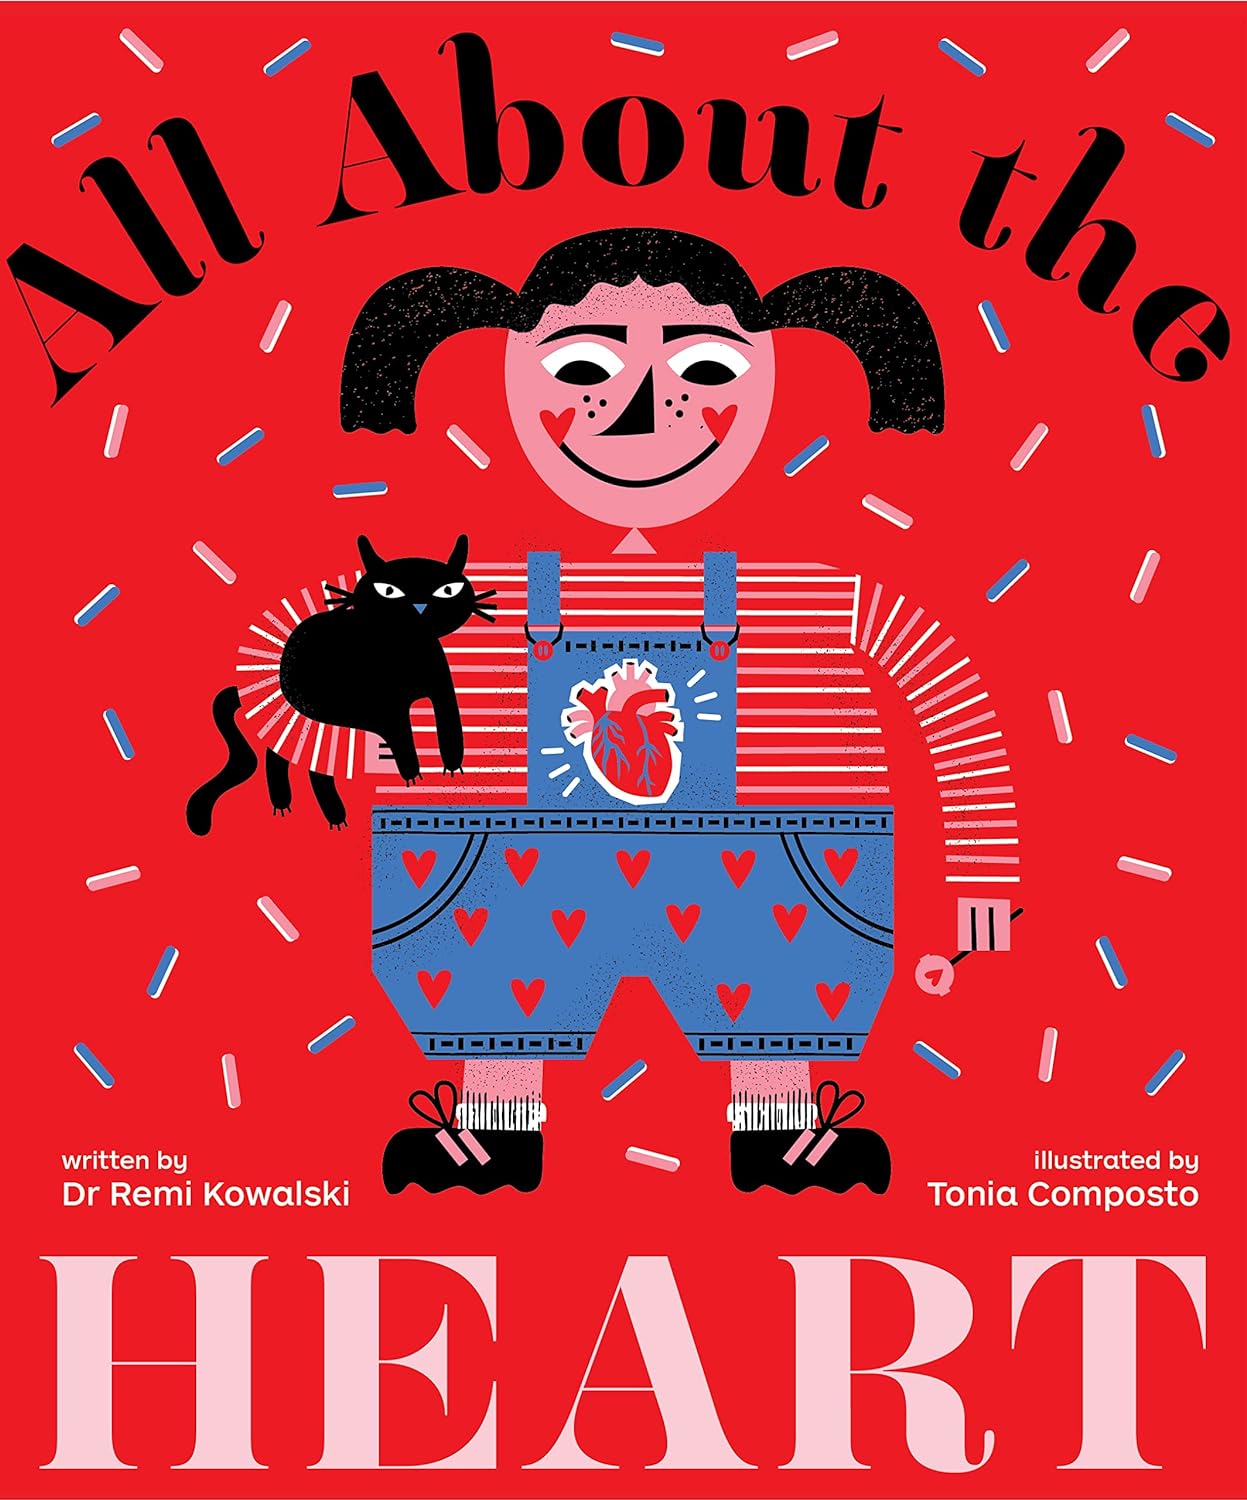 All about the Heart by Dr Remi Kowalski Illustrated by Tonia Composta cover